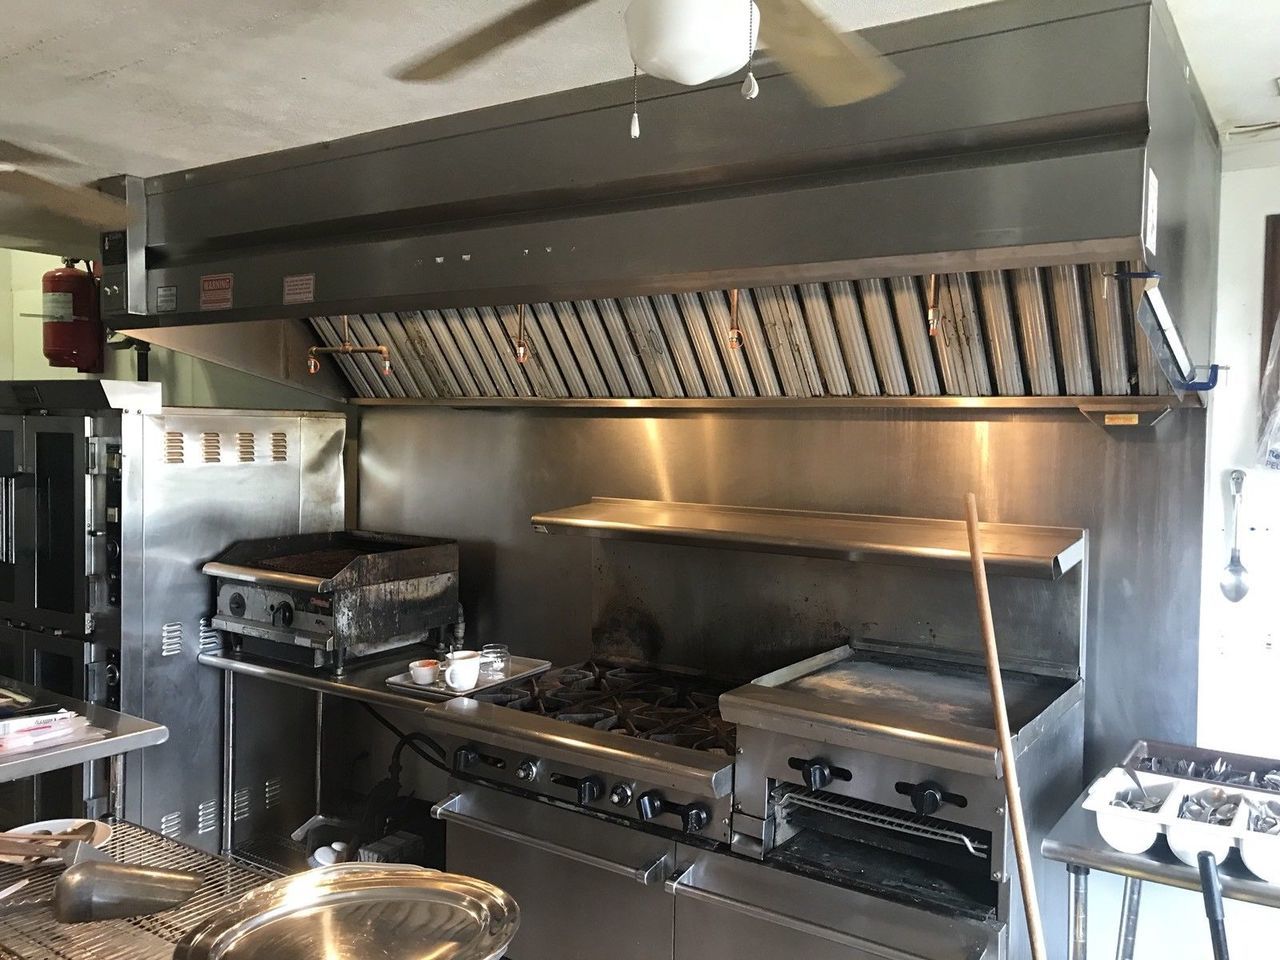 3 Things to Know About Buying a Restaurant Grill